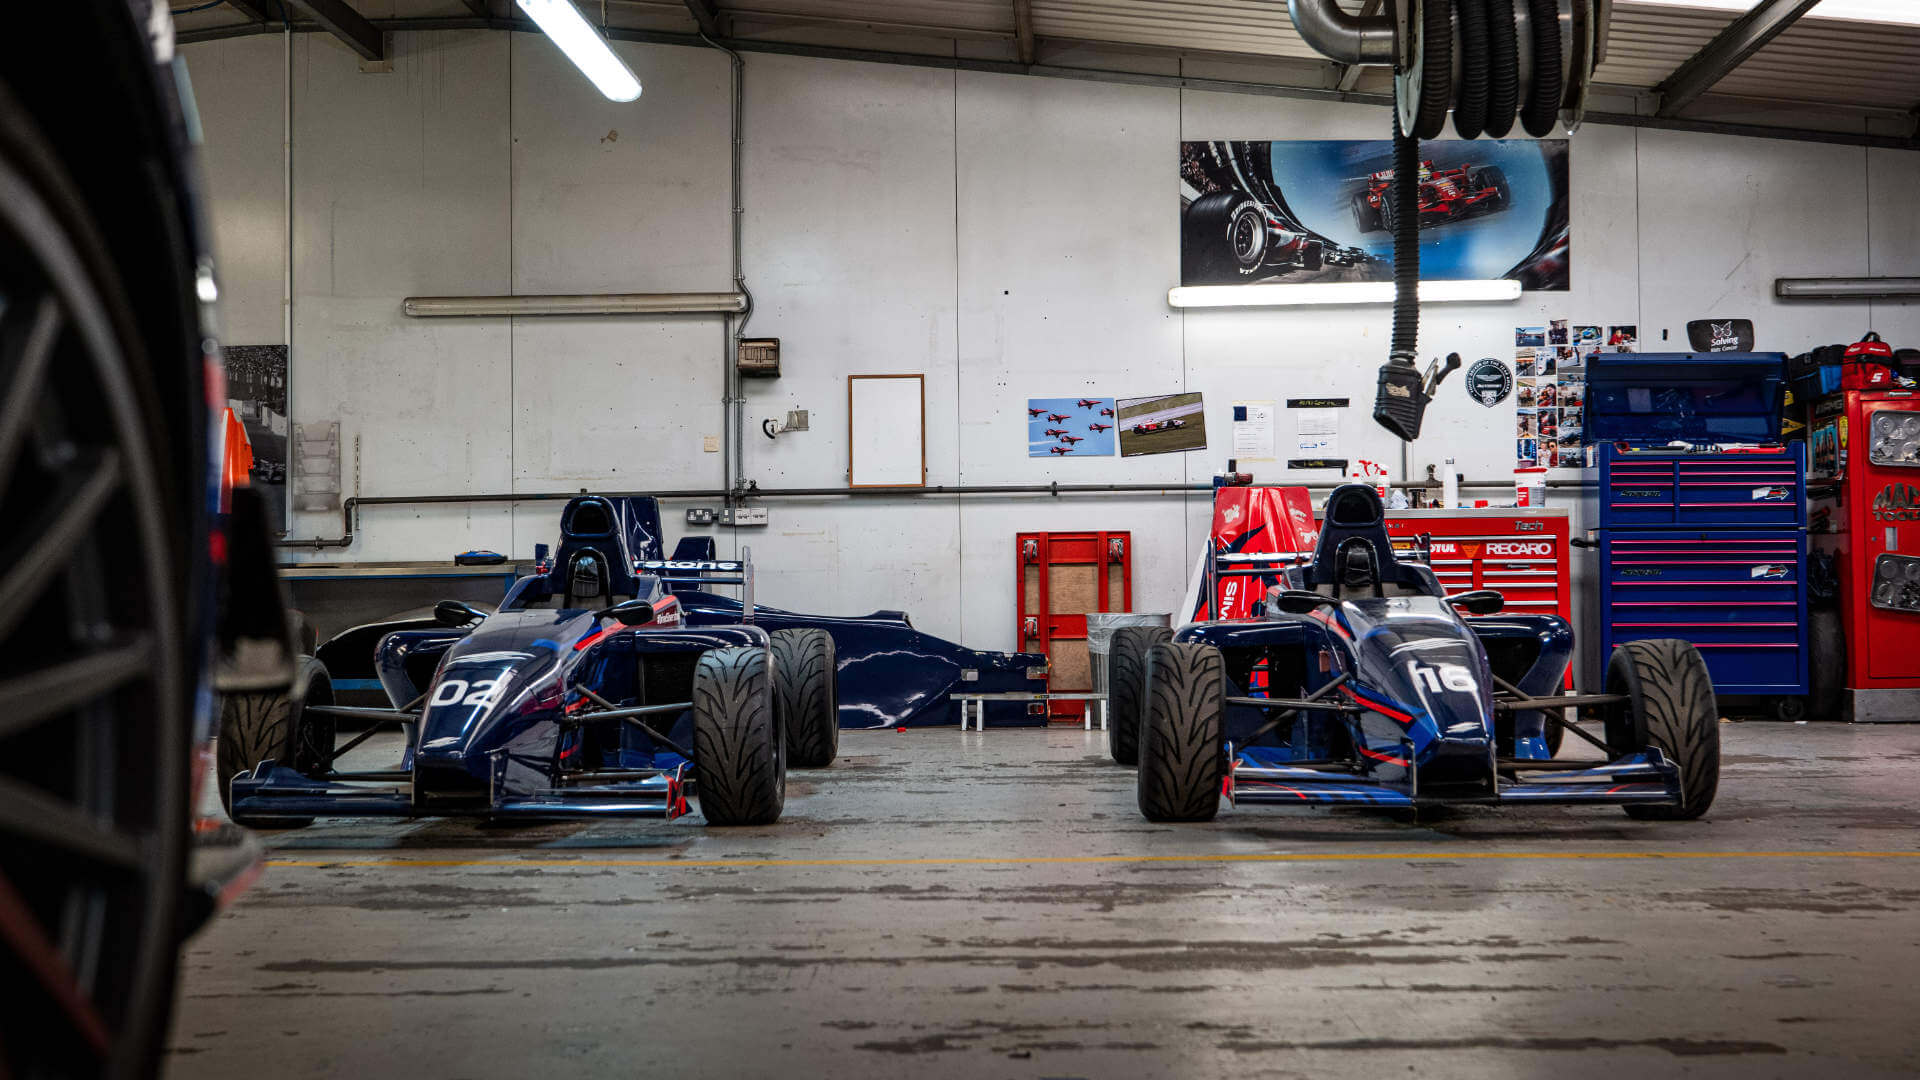 Two Formula Single seaters sit in the garage. Bodywork parts are visible in the background